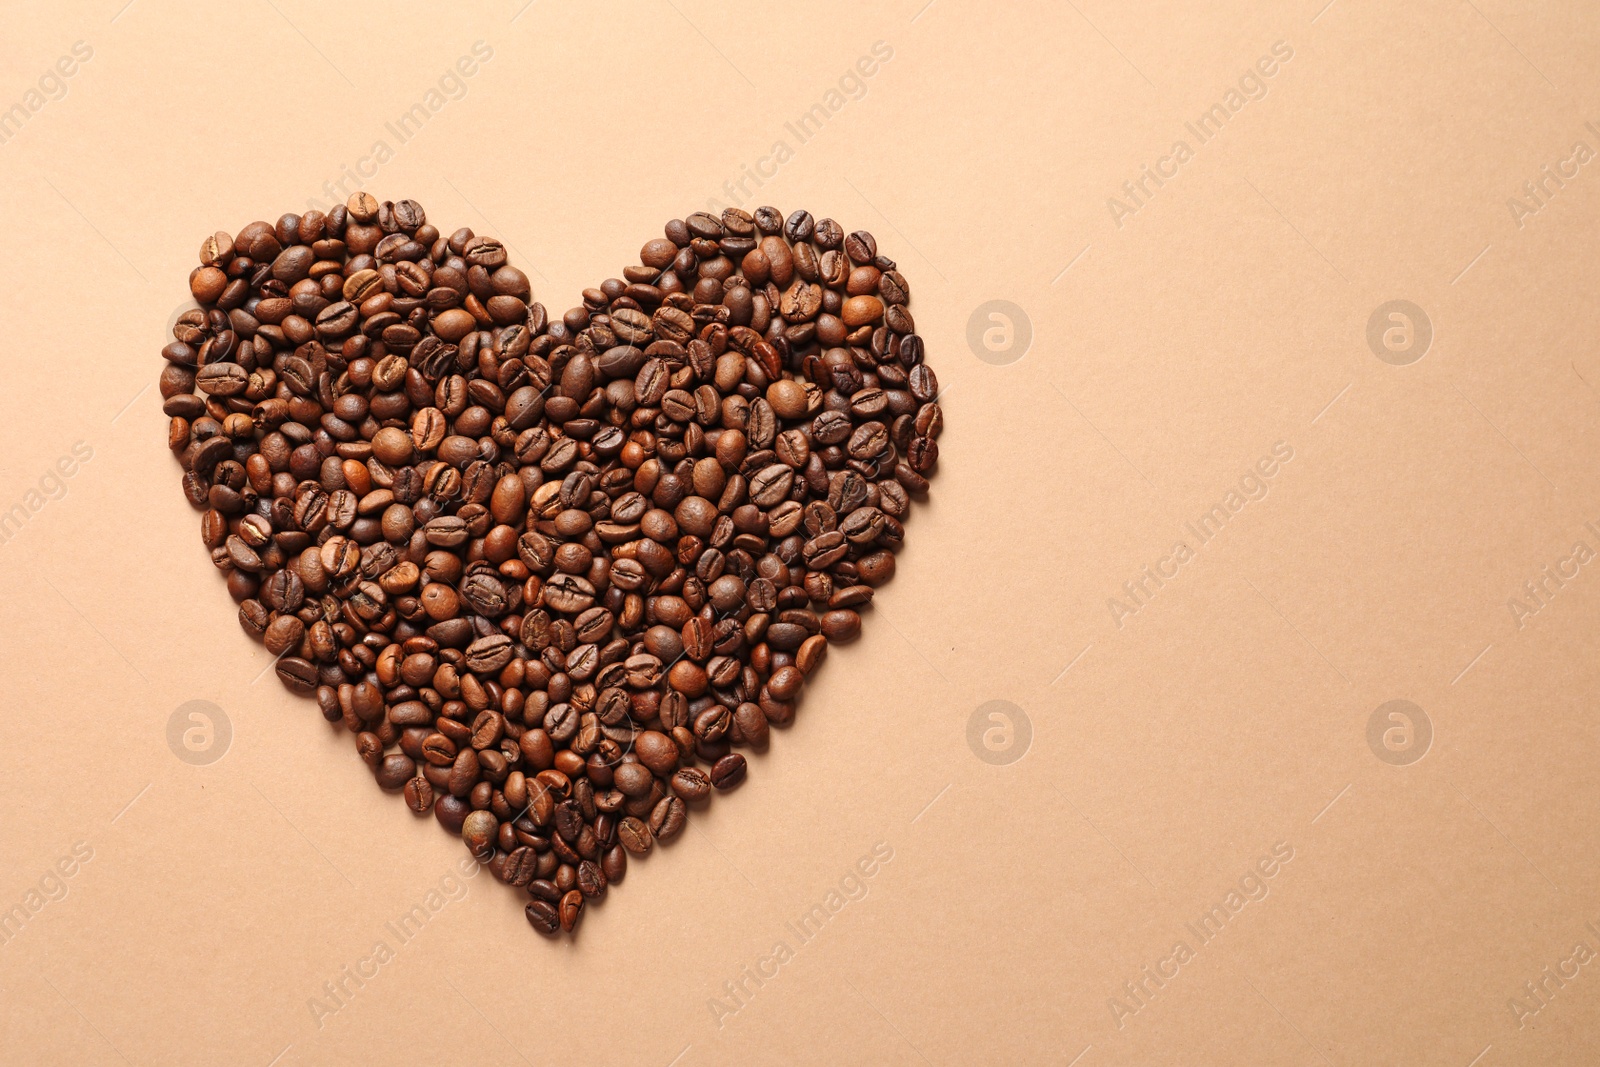 Photo of Heart shaped pile of coffee beans on light orange background, top view with space for text